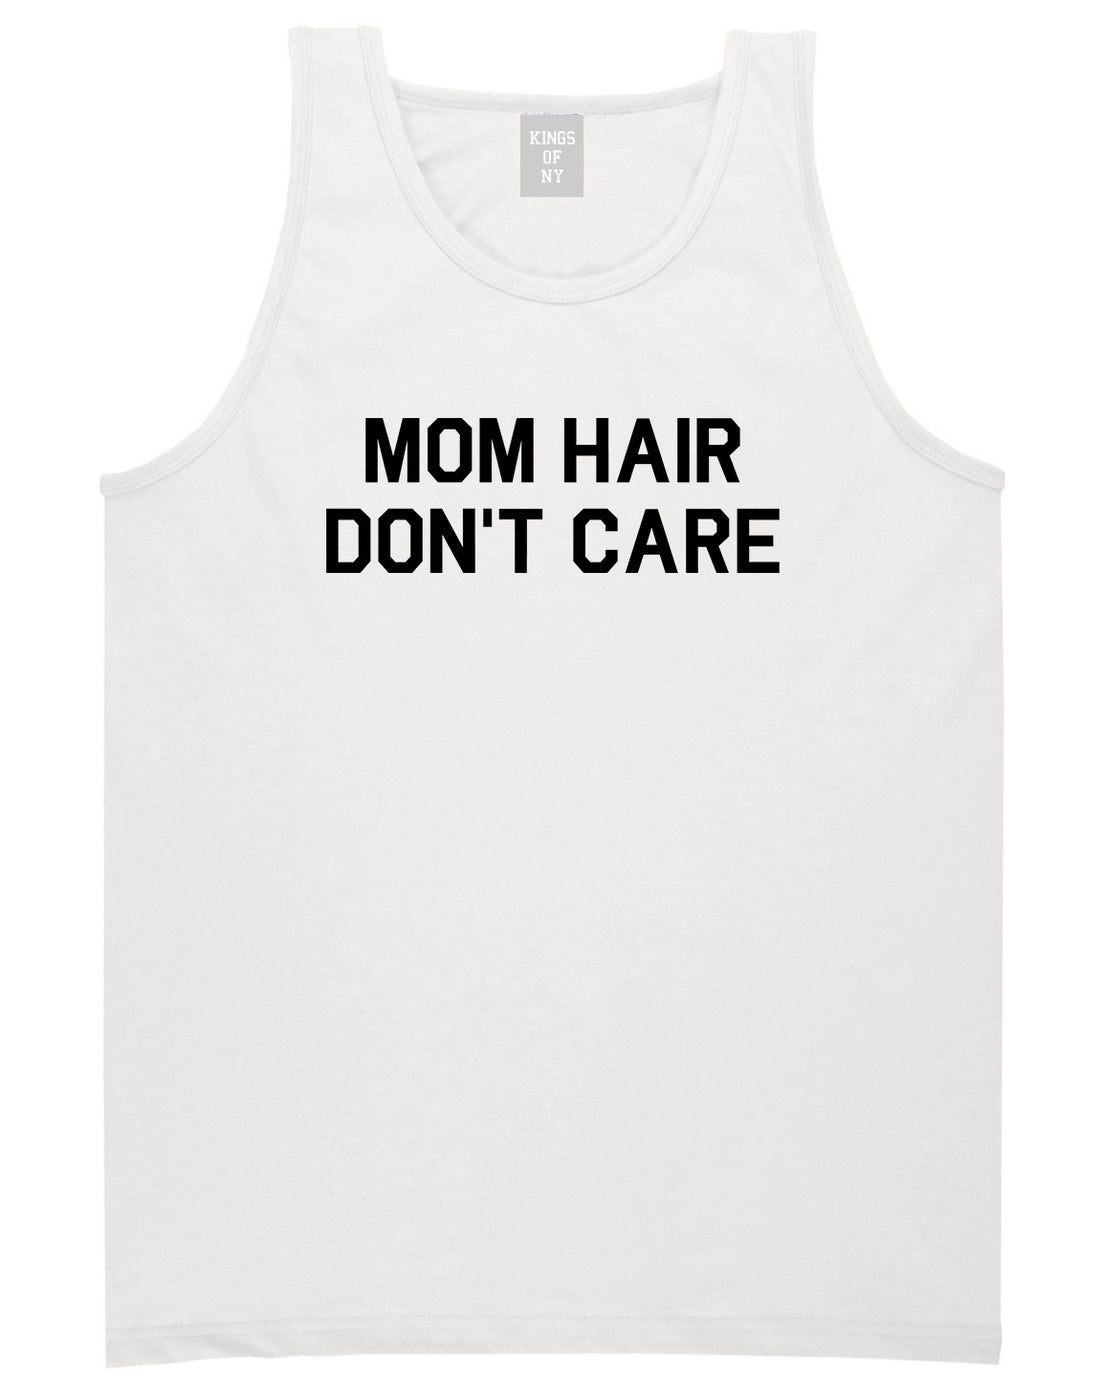 Mom Hair Dont Care White Tank Top Shirt by Kings Of NY